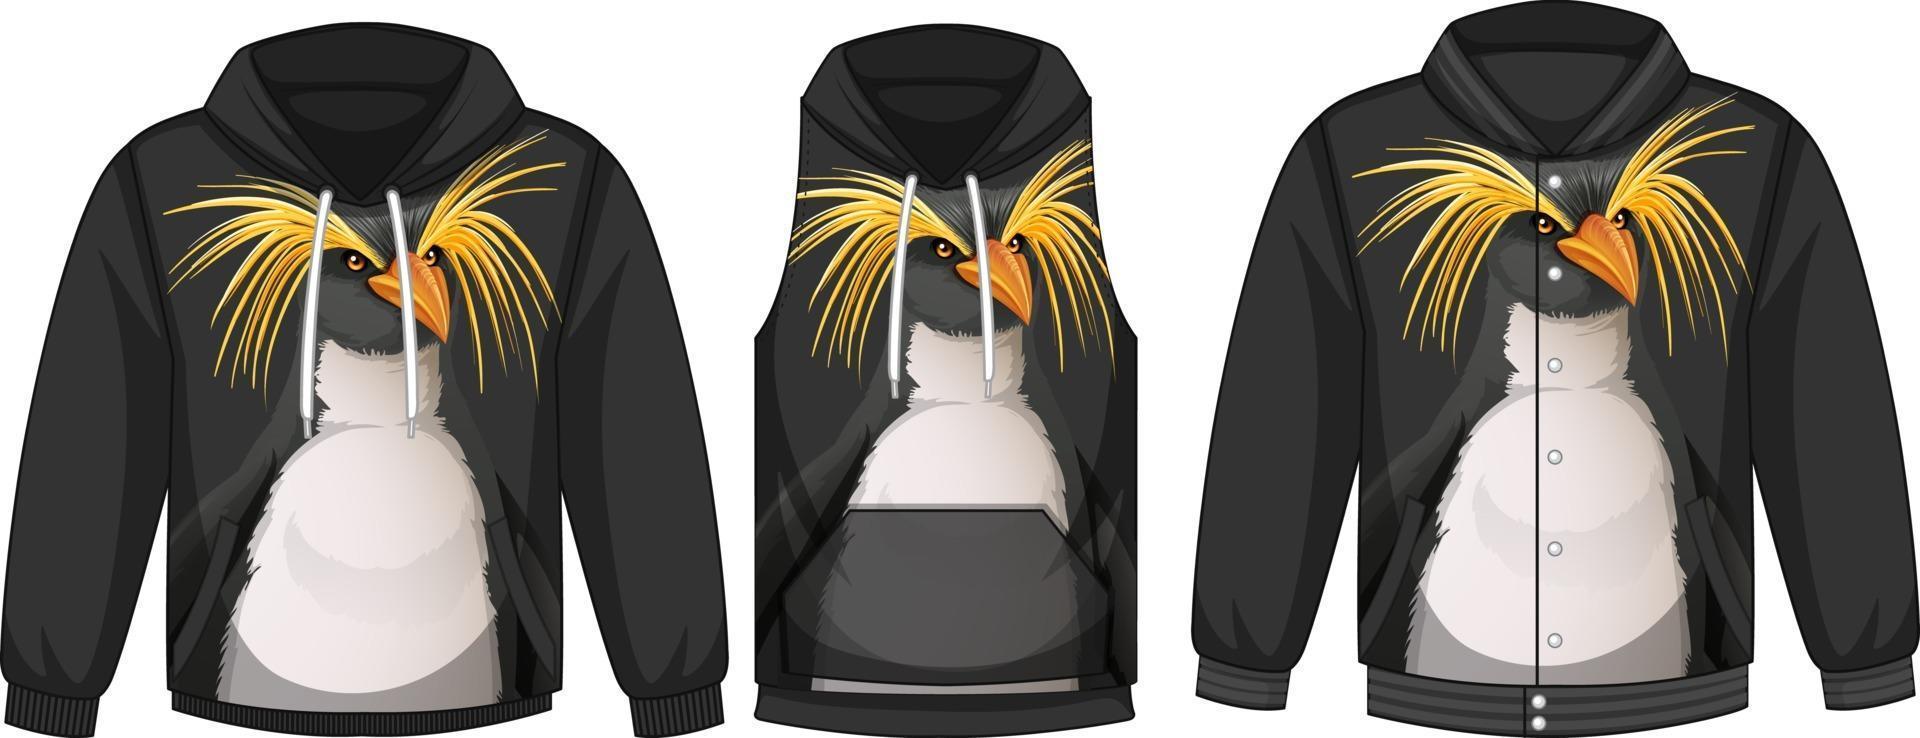 Set of different jackets with penguin template vector